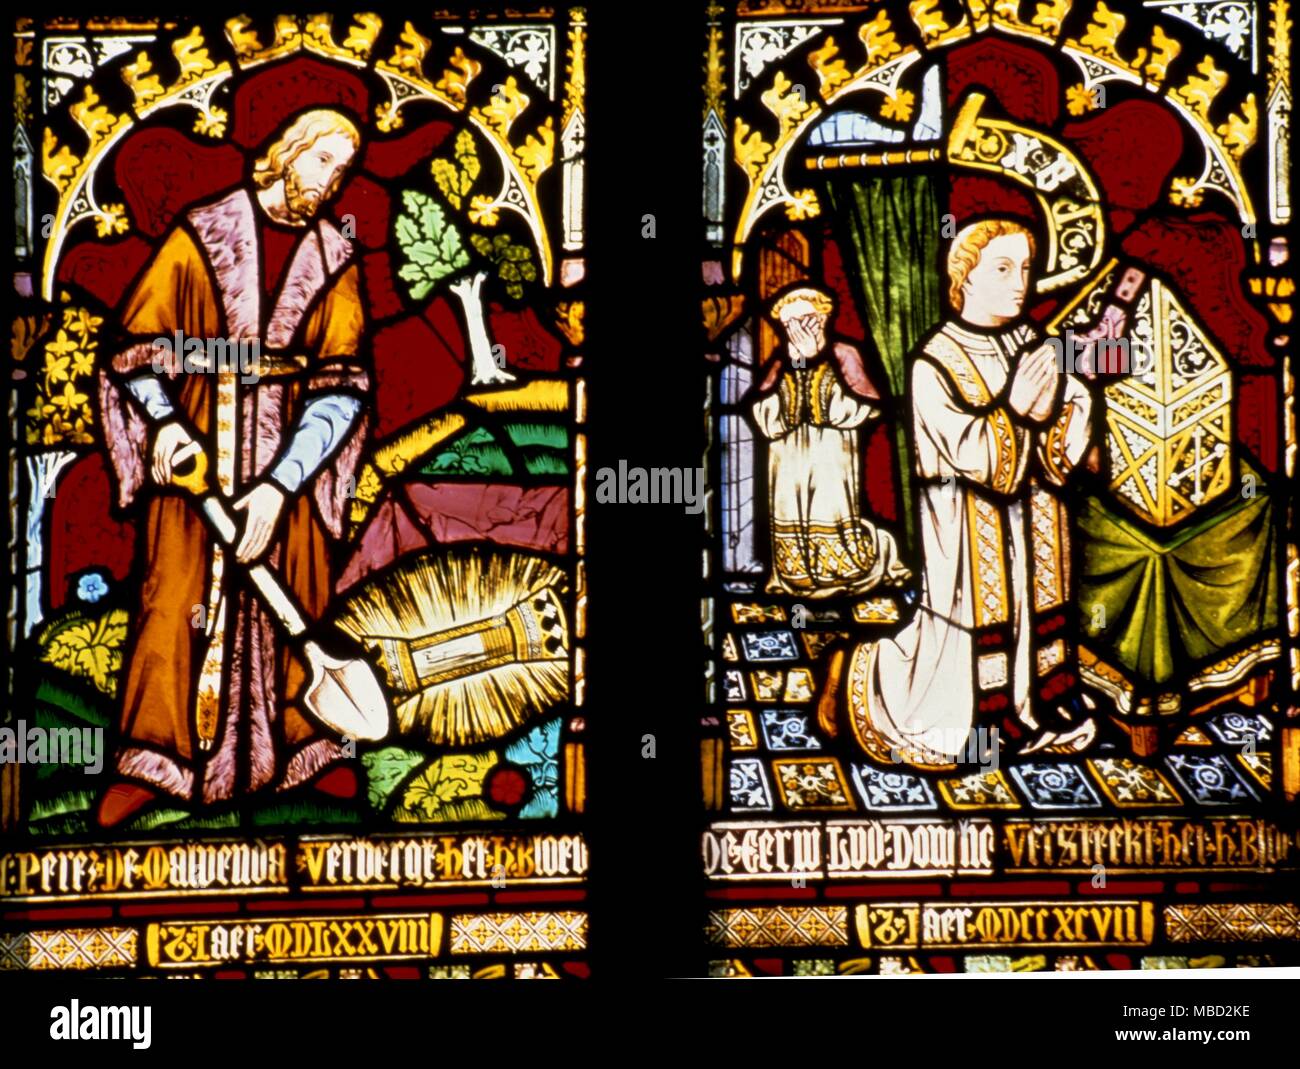 Bruges, Belgium. Stained glass window in the Chapel of the Holy Blood, shows the sacred blood of Jesus being buried in a phial to protect it. Stock Photo